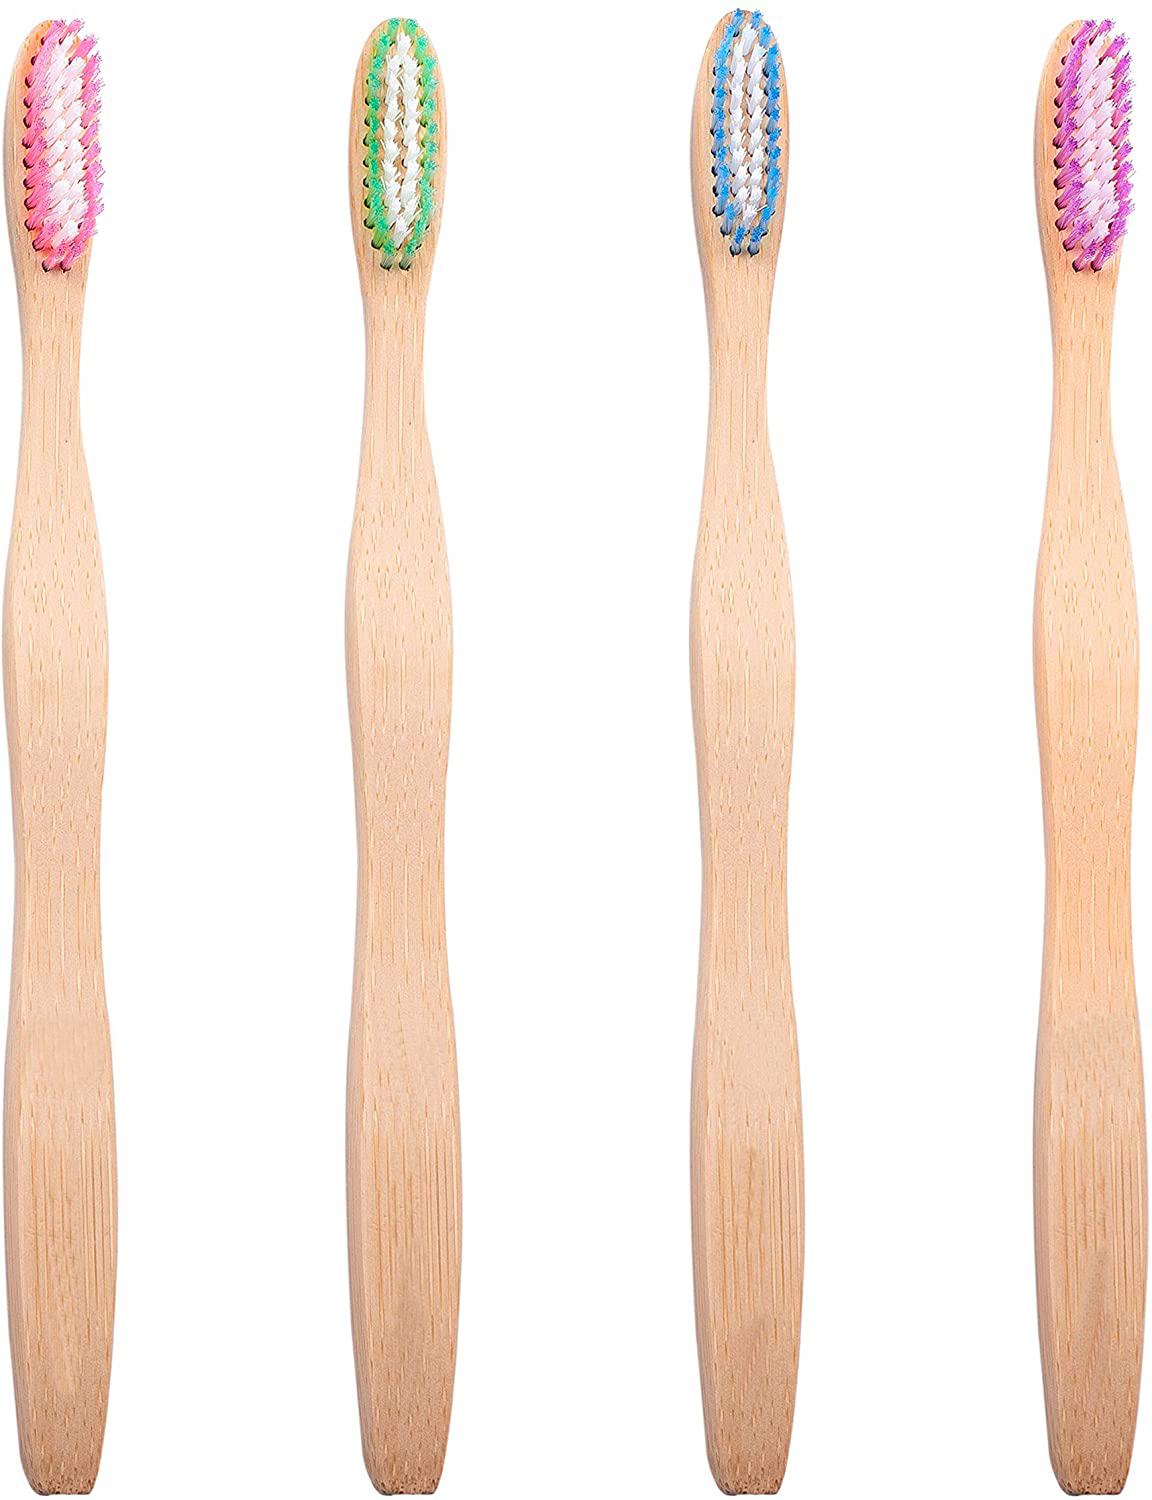 Low price for Bamboo Toothbrush With Natural Bristles - 100% Plastic Free & Biodegradable Soft Bristles Bamboo Toothbrush For Adults and Kids – CHYM